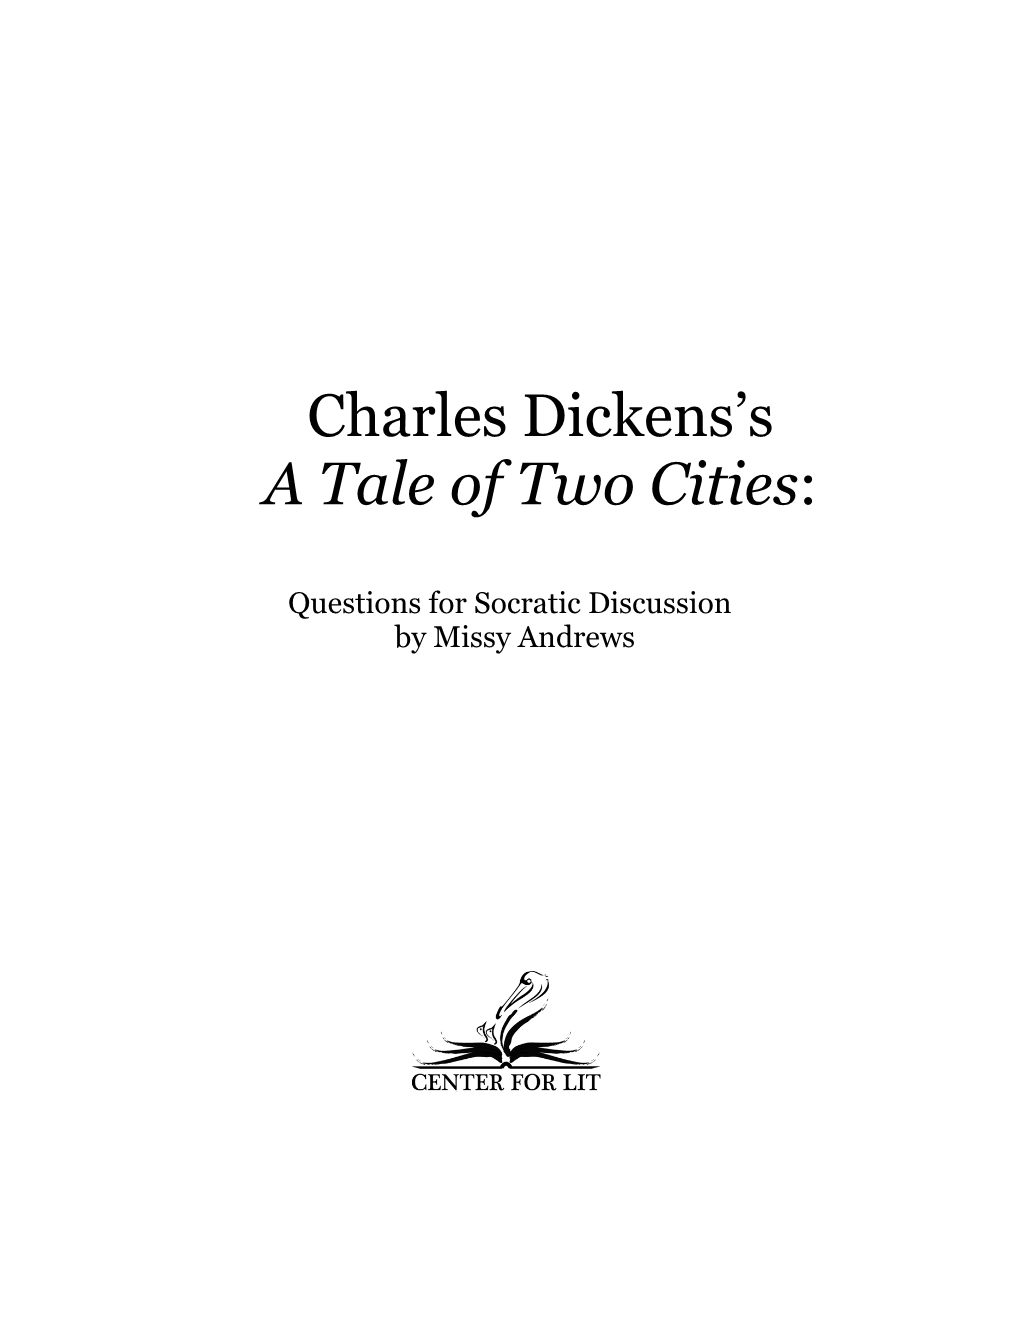 Charles Dickens's a Tale of Two Cities